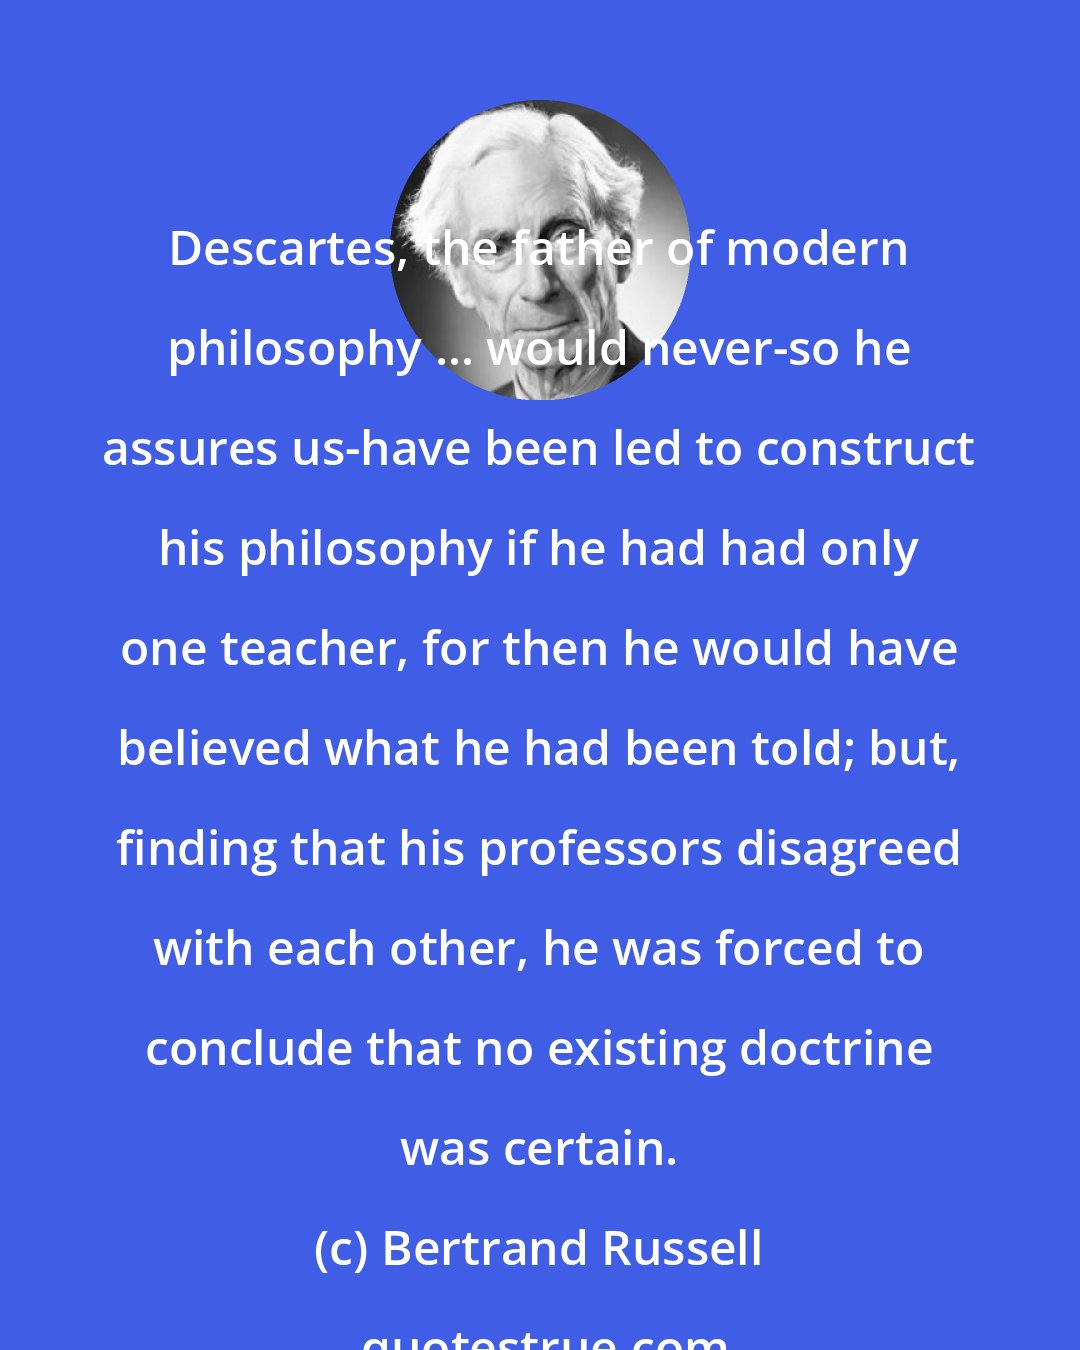 Bertrand Russell: Descartes, the father of modern philosophy ... would never-so he assures us-have been led to construct his philosophy if he had had only one teacher, for then he would have believed what he had been told; but, finding that his professors disagreed with each other, he was forced to conclude that no existing doctrine was certain.